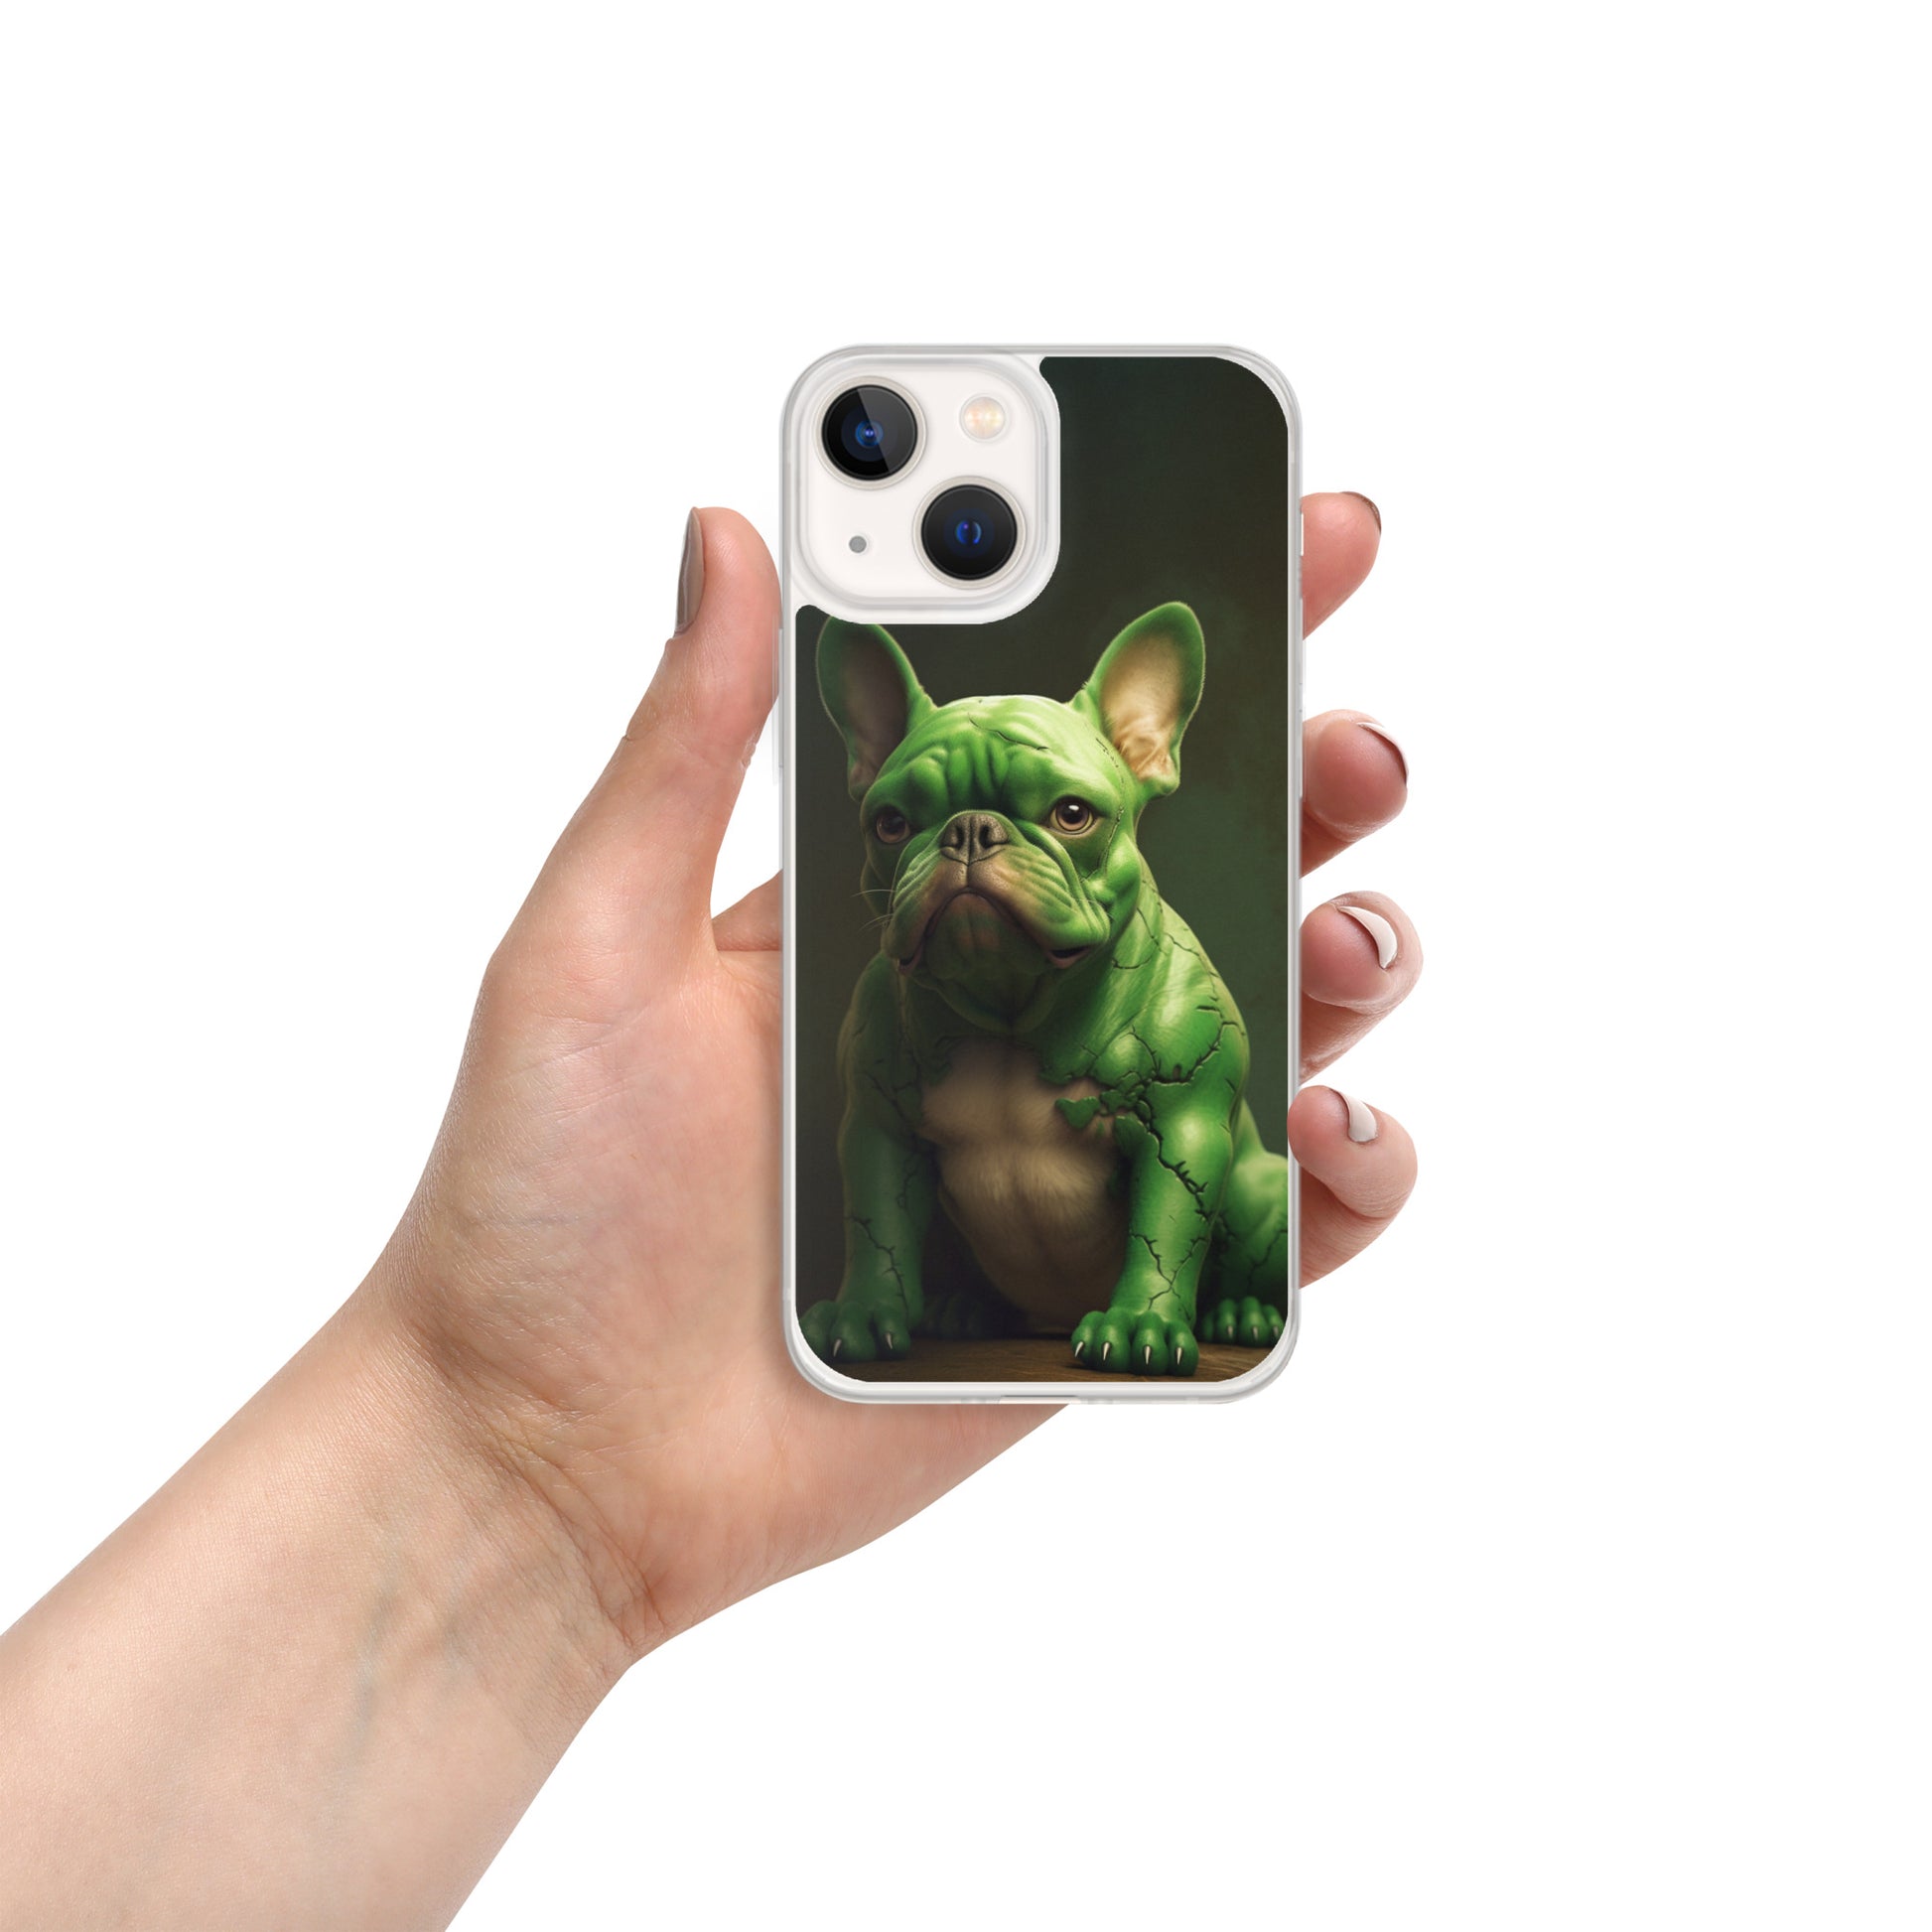 Frenchie iPhone Case - Powerful & Adorable Phone Armor